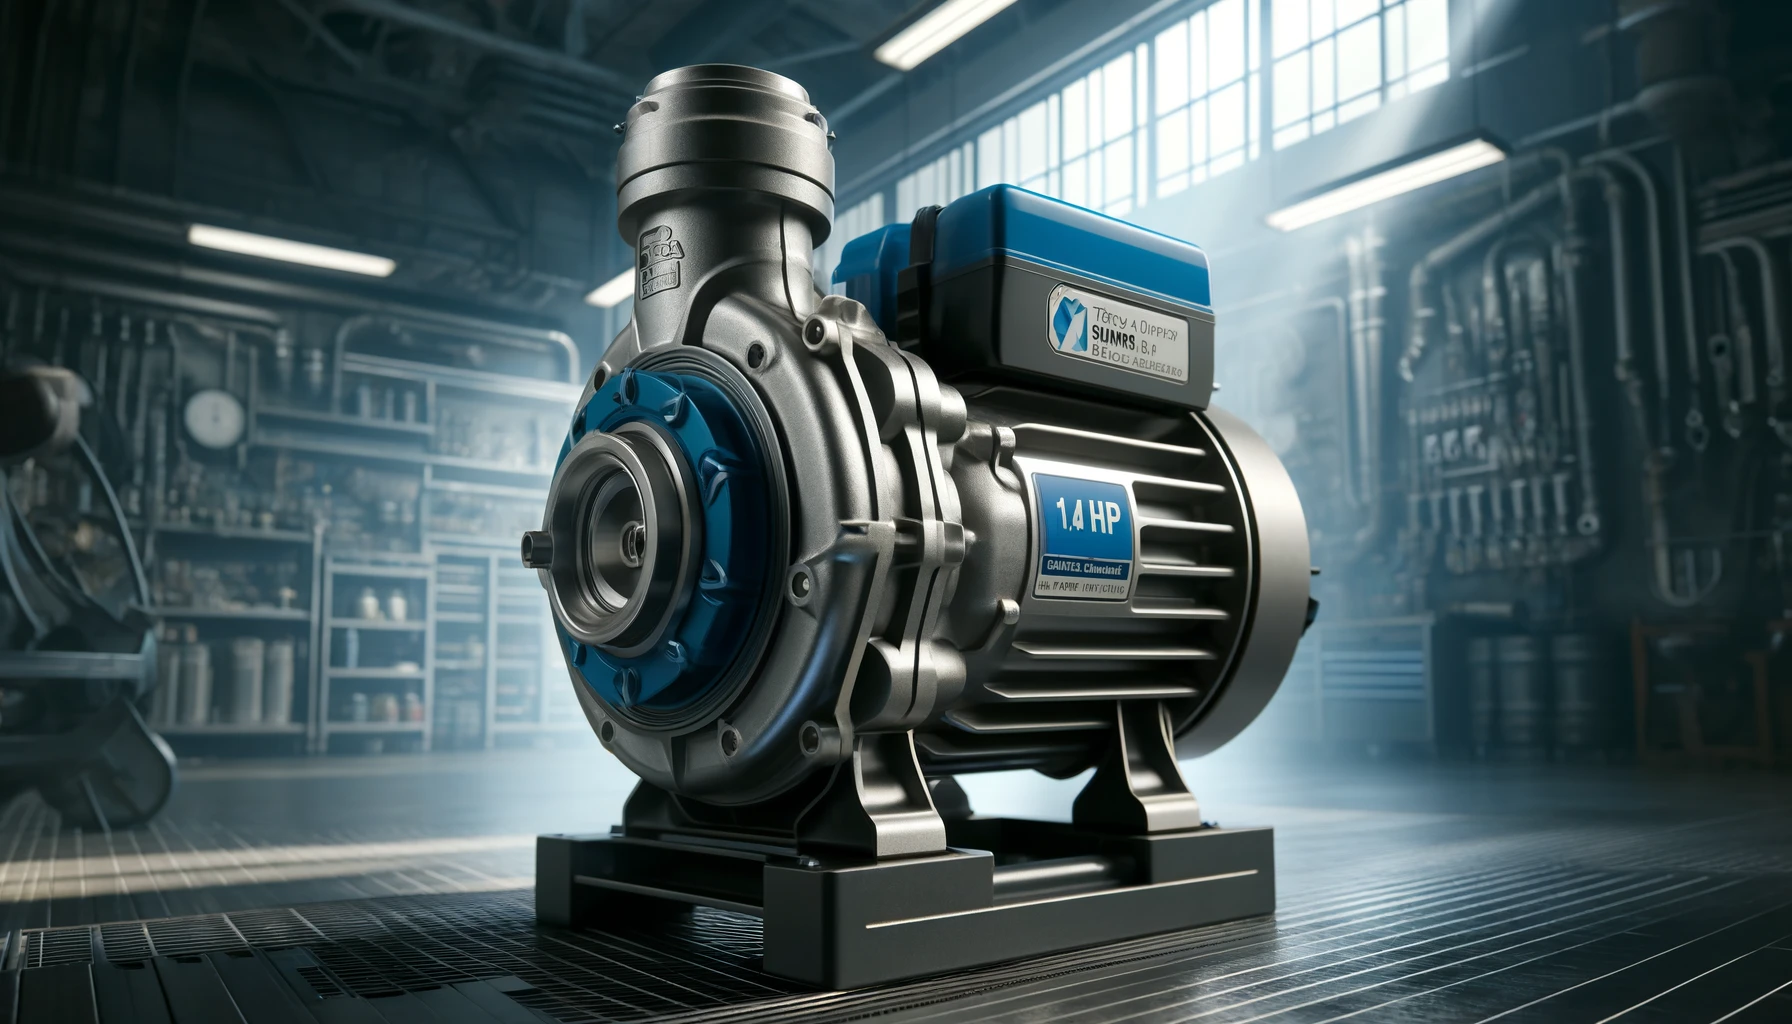 Modern industrial pump labeled 'Top Oma Pump 1.4 HP', featuring metallic body with blue accents in a workshop setting.